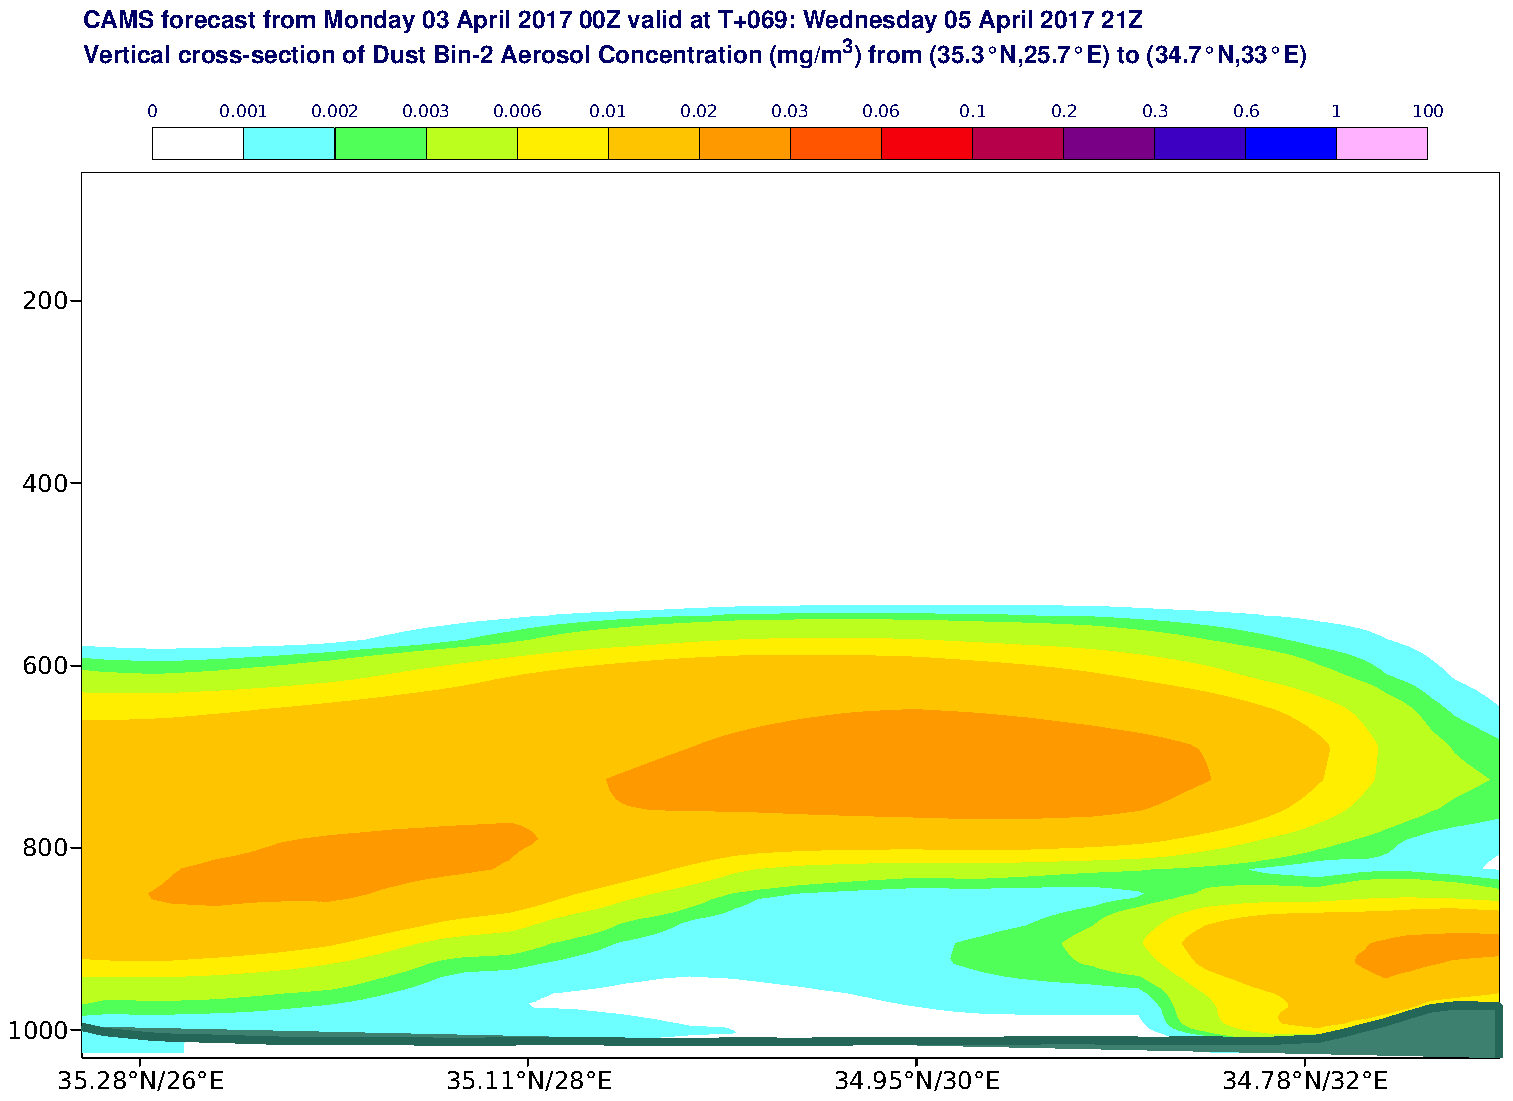 Vertical cross-section of Dust Bin-2 Aerosol Concentration (mg/m3) valid at T69 - 2017-04-05 21:00